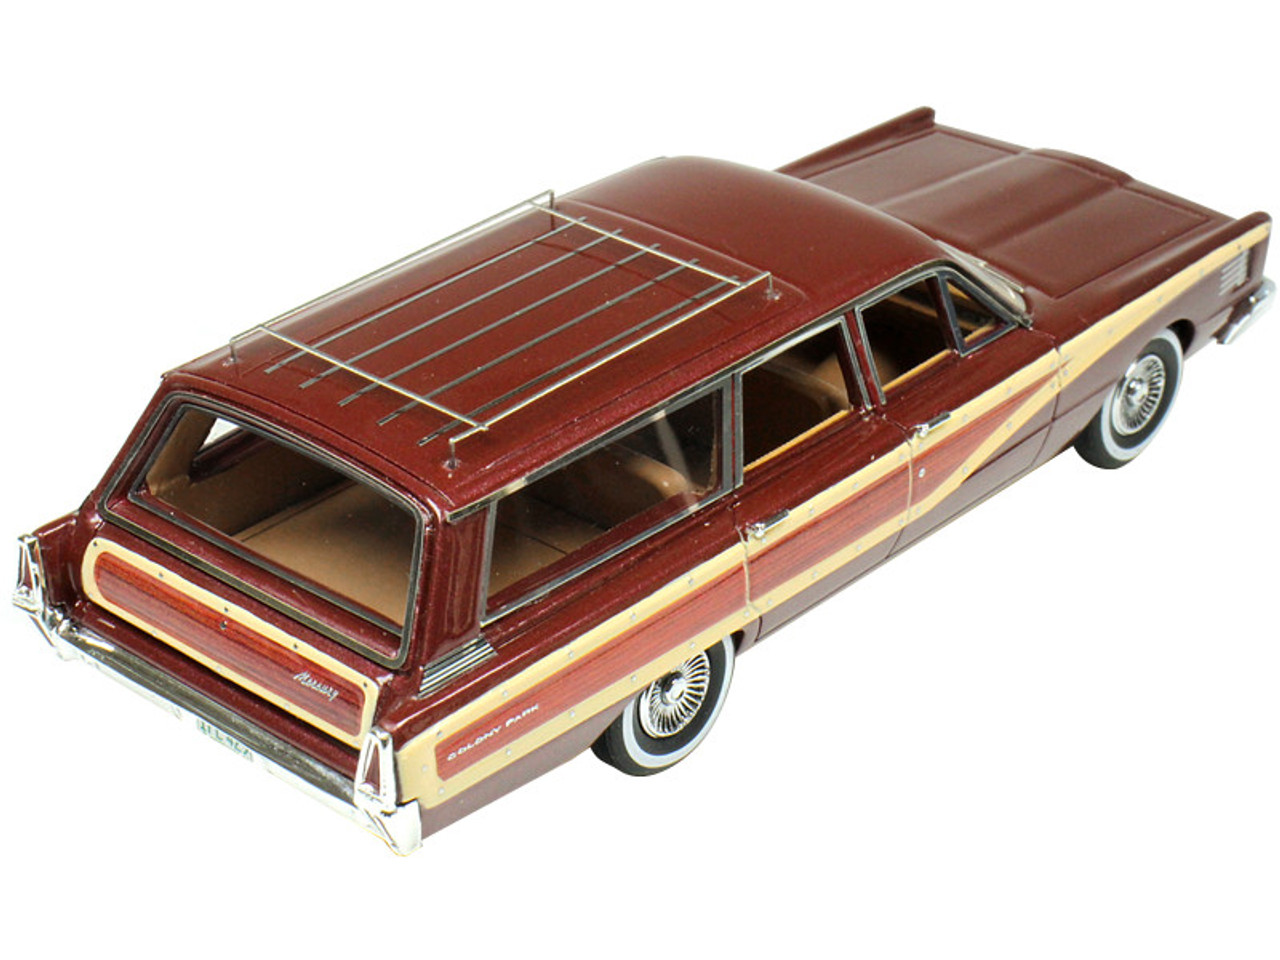 1965 Mercury Station Wagon Burgundy Metallic with Wood Panels Limited Edition to 200 pieces Worldwide 1/43 Model Car by Goldvarg Collection